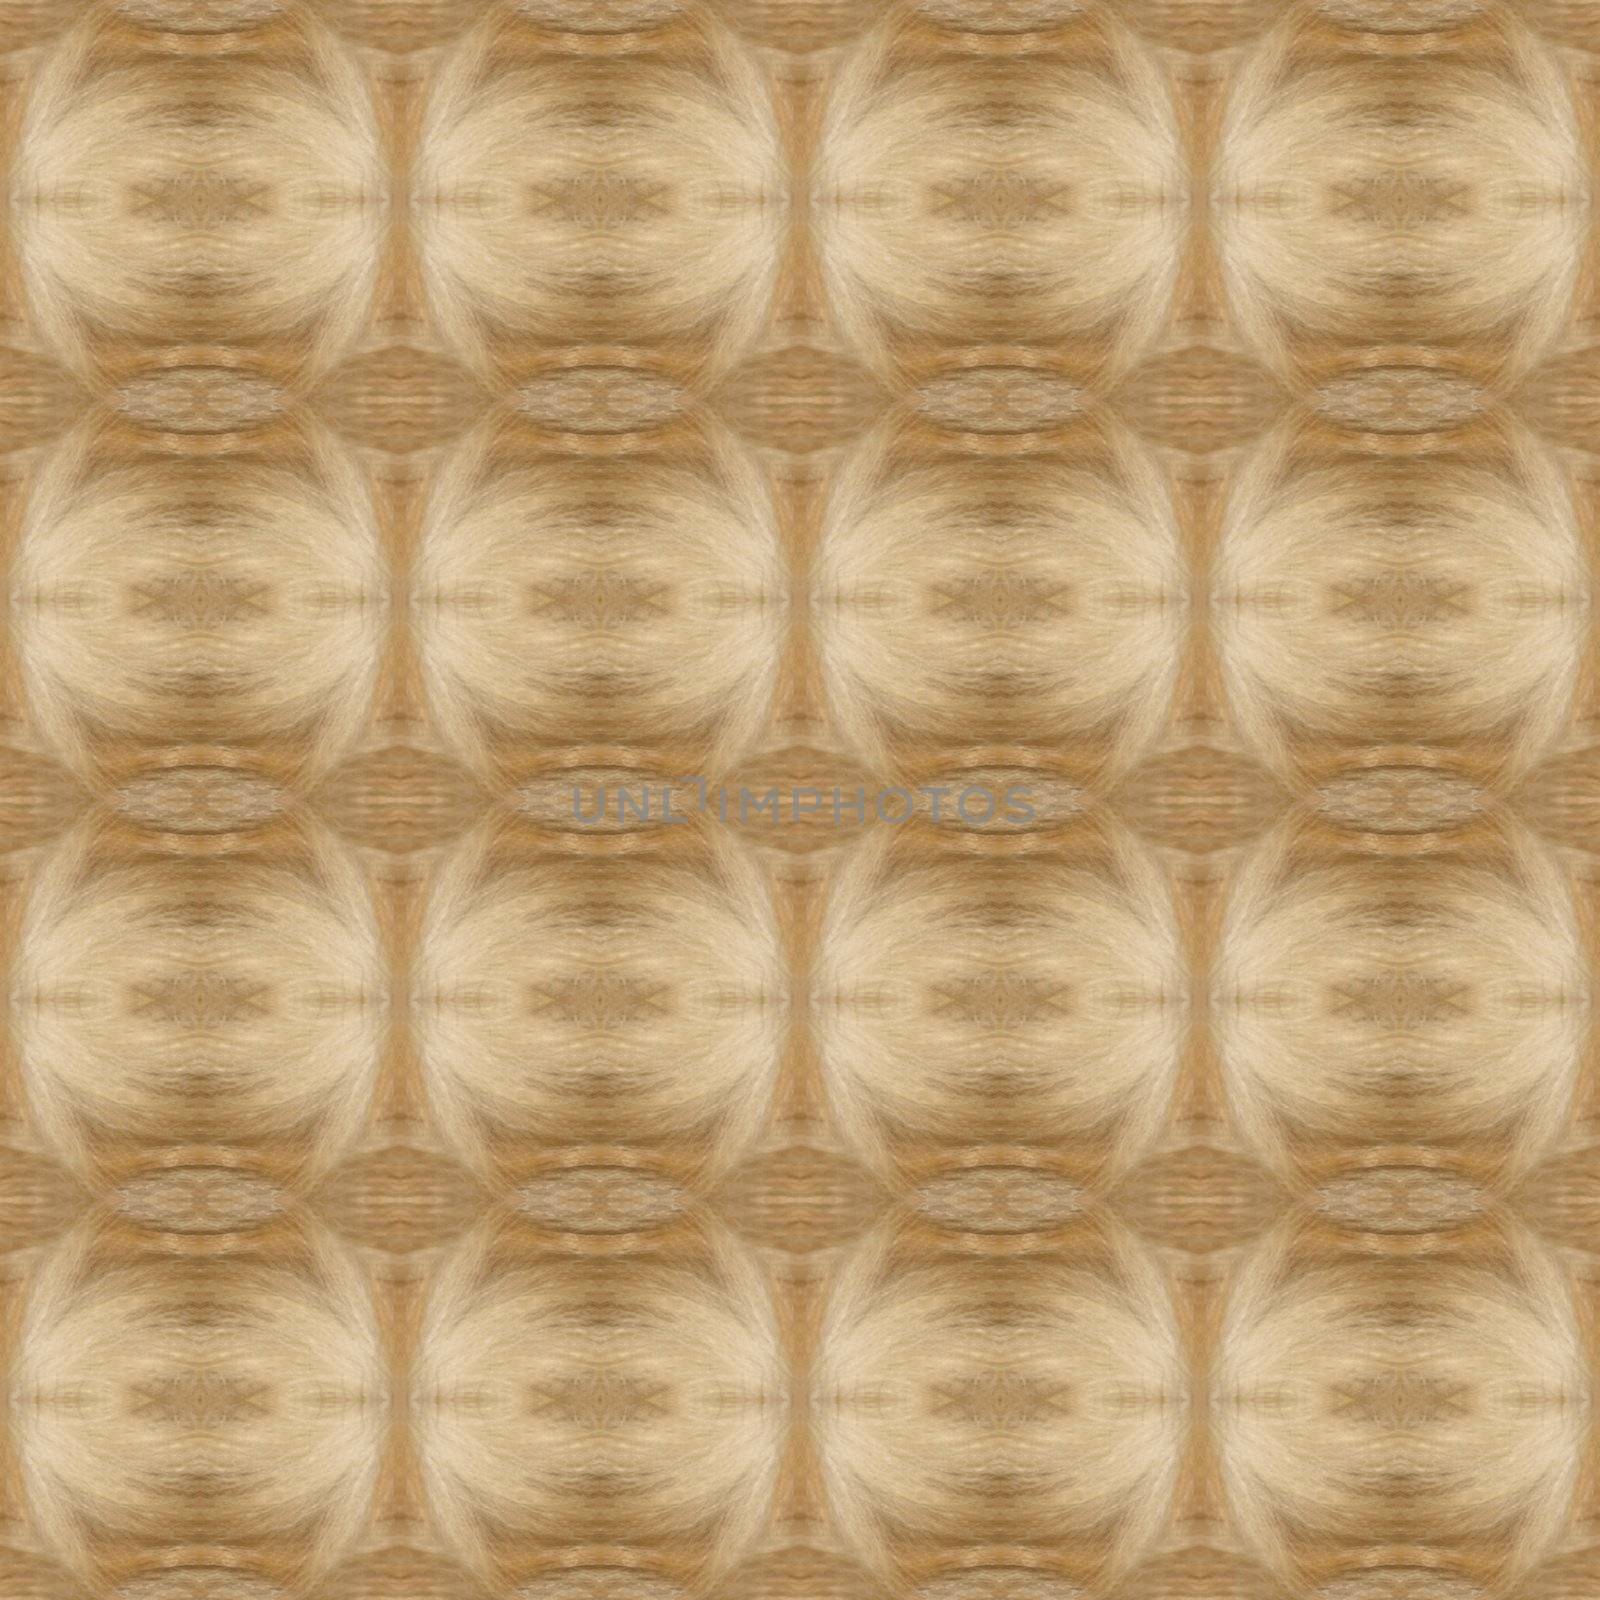 Beige tileable and seamless border or background texture made of fur tiles in an old-fashioned style